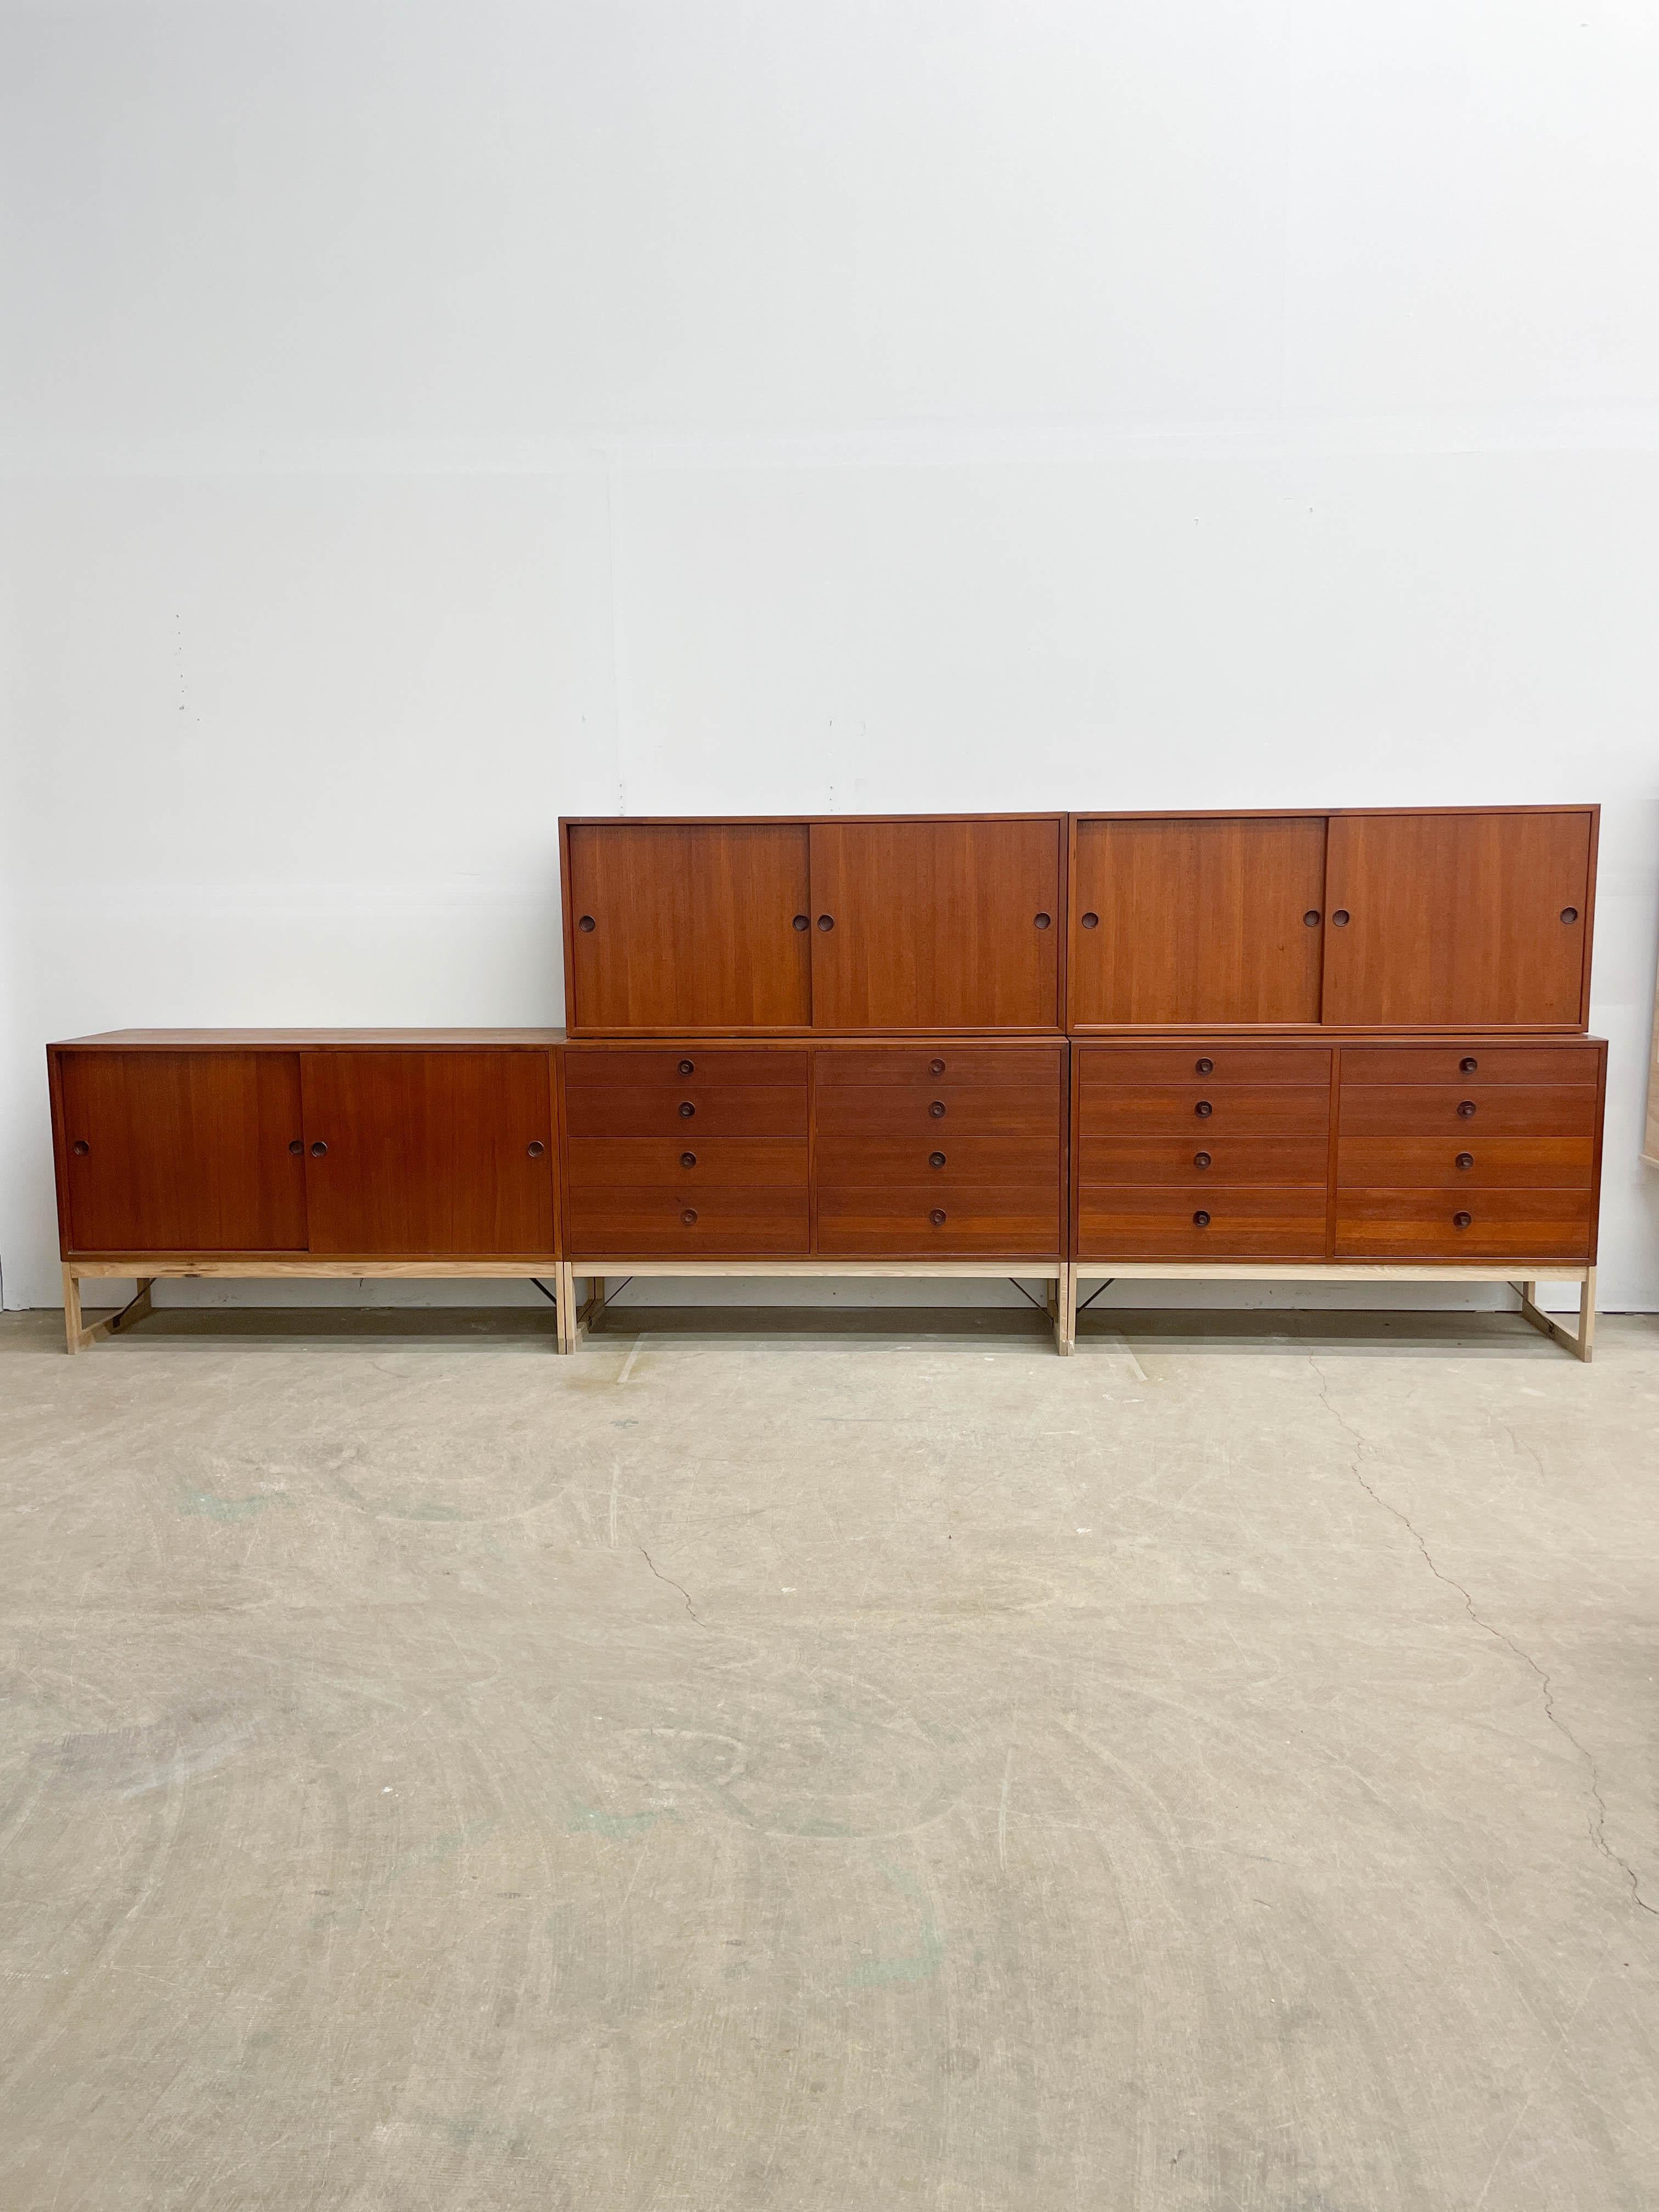 Superb case series designed by Borge Mogensen and made by AB Karl Anderson & Soner in the 1950s. These cabinets have it all: teak cases, solid teak drawer fronts dovetailed into pine drawers, recessed teak sliding door pulls, distinctive sculpted